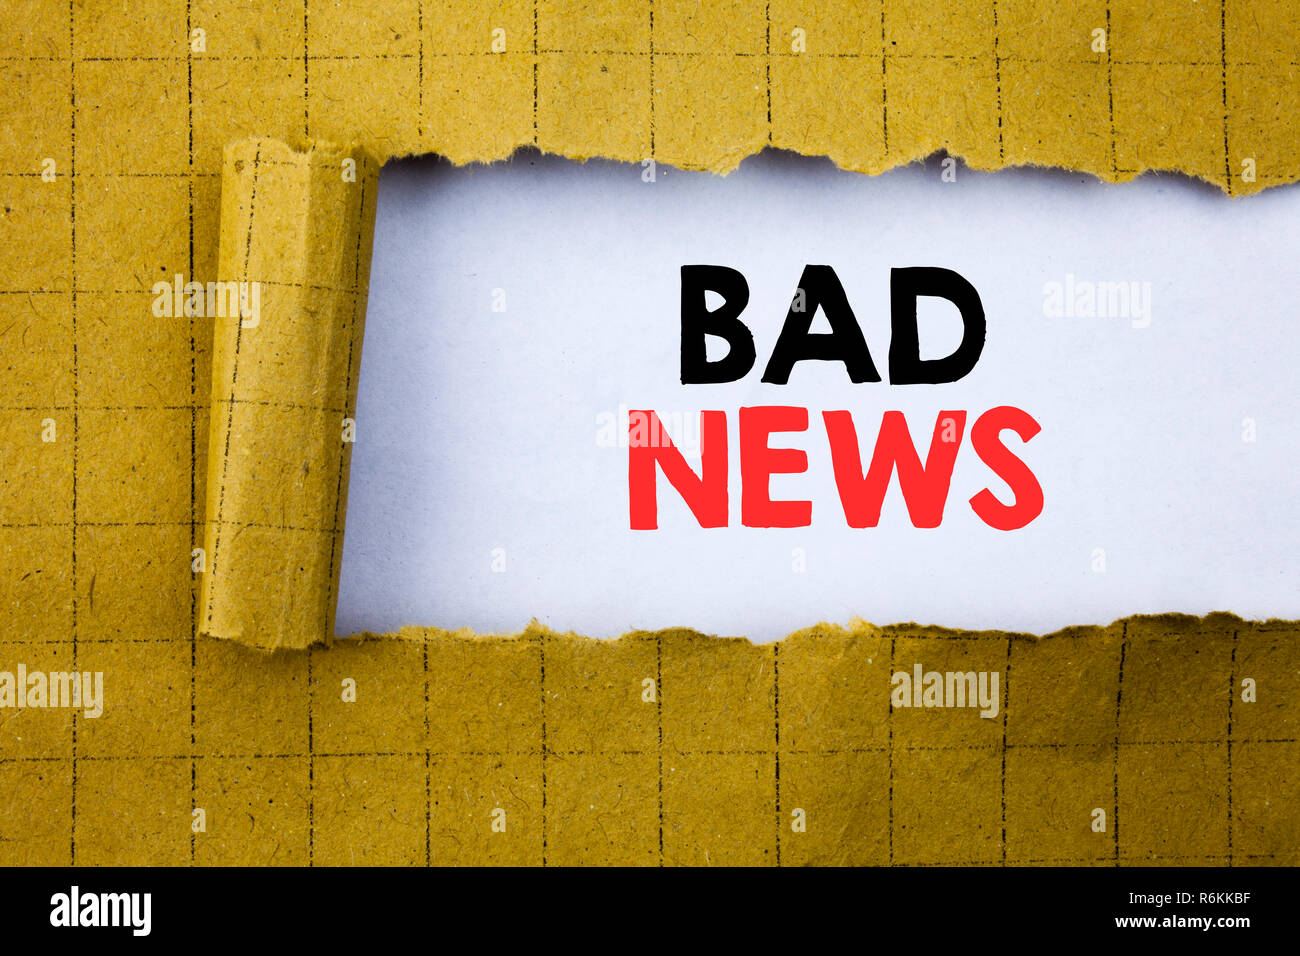 Bad News. Business concept for Failure Media Newspaper written on white paper on the yellow folded paper. Stock Photo